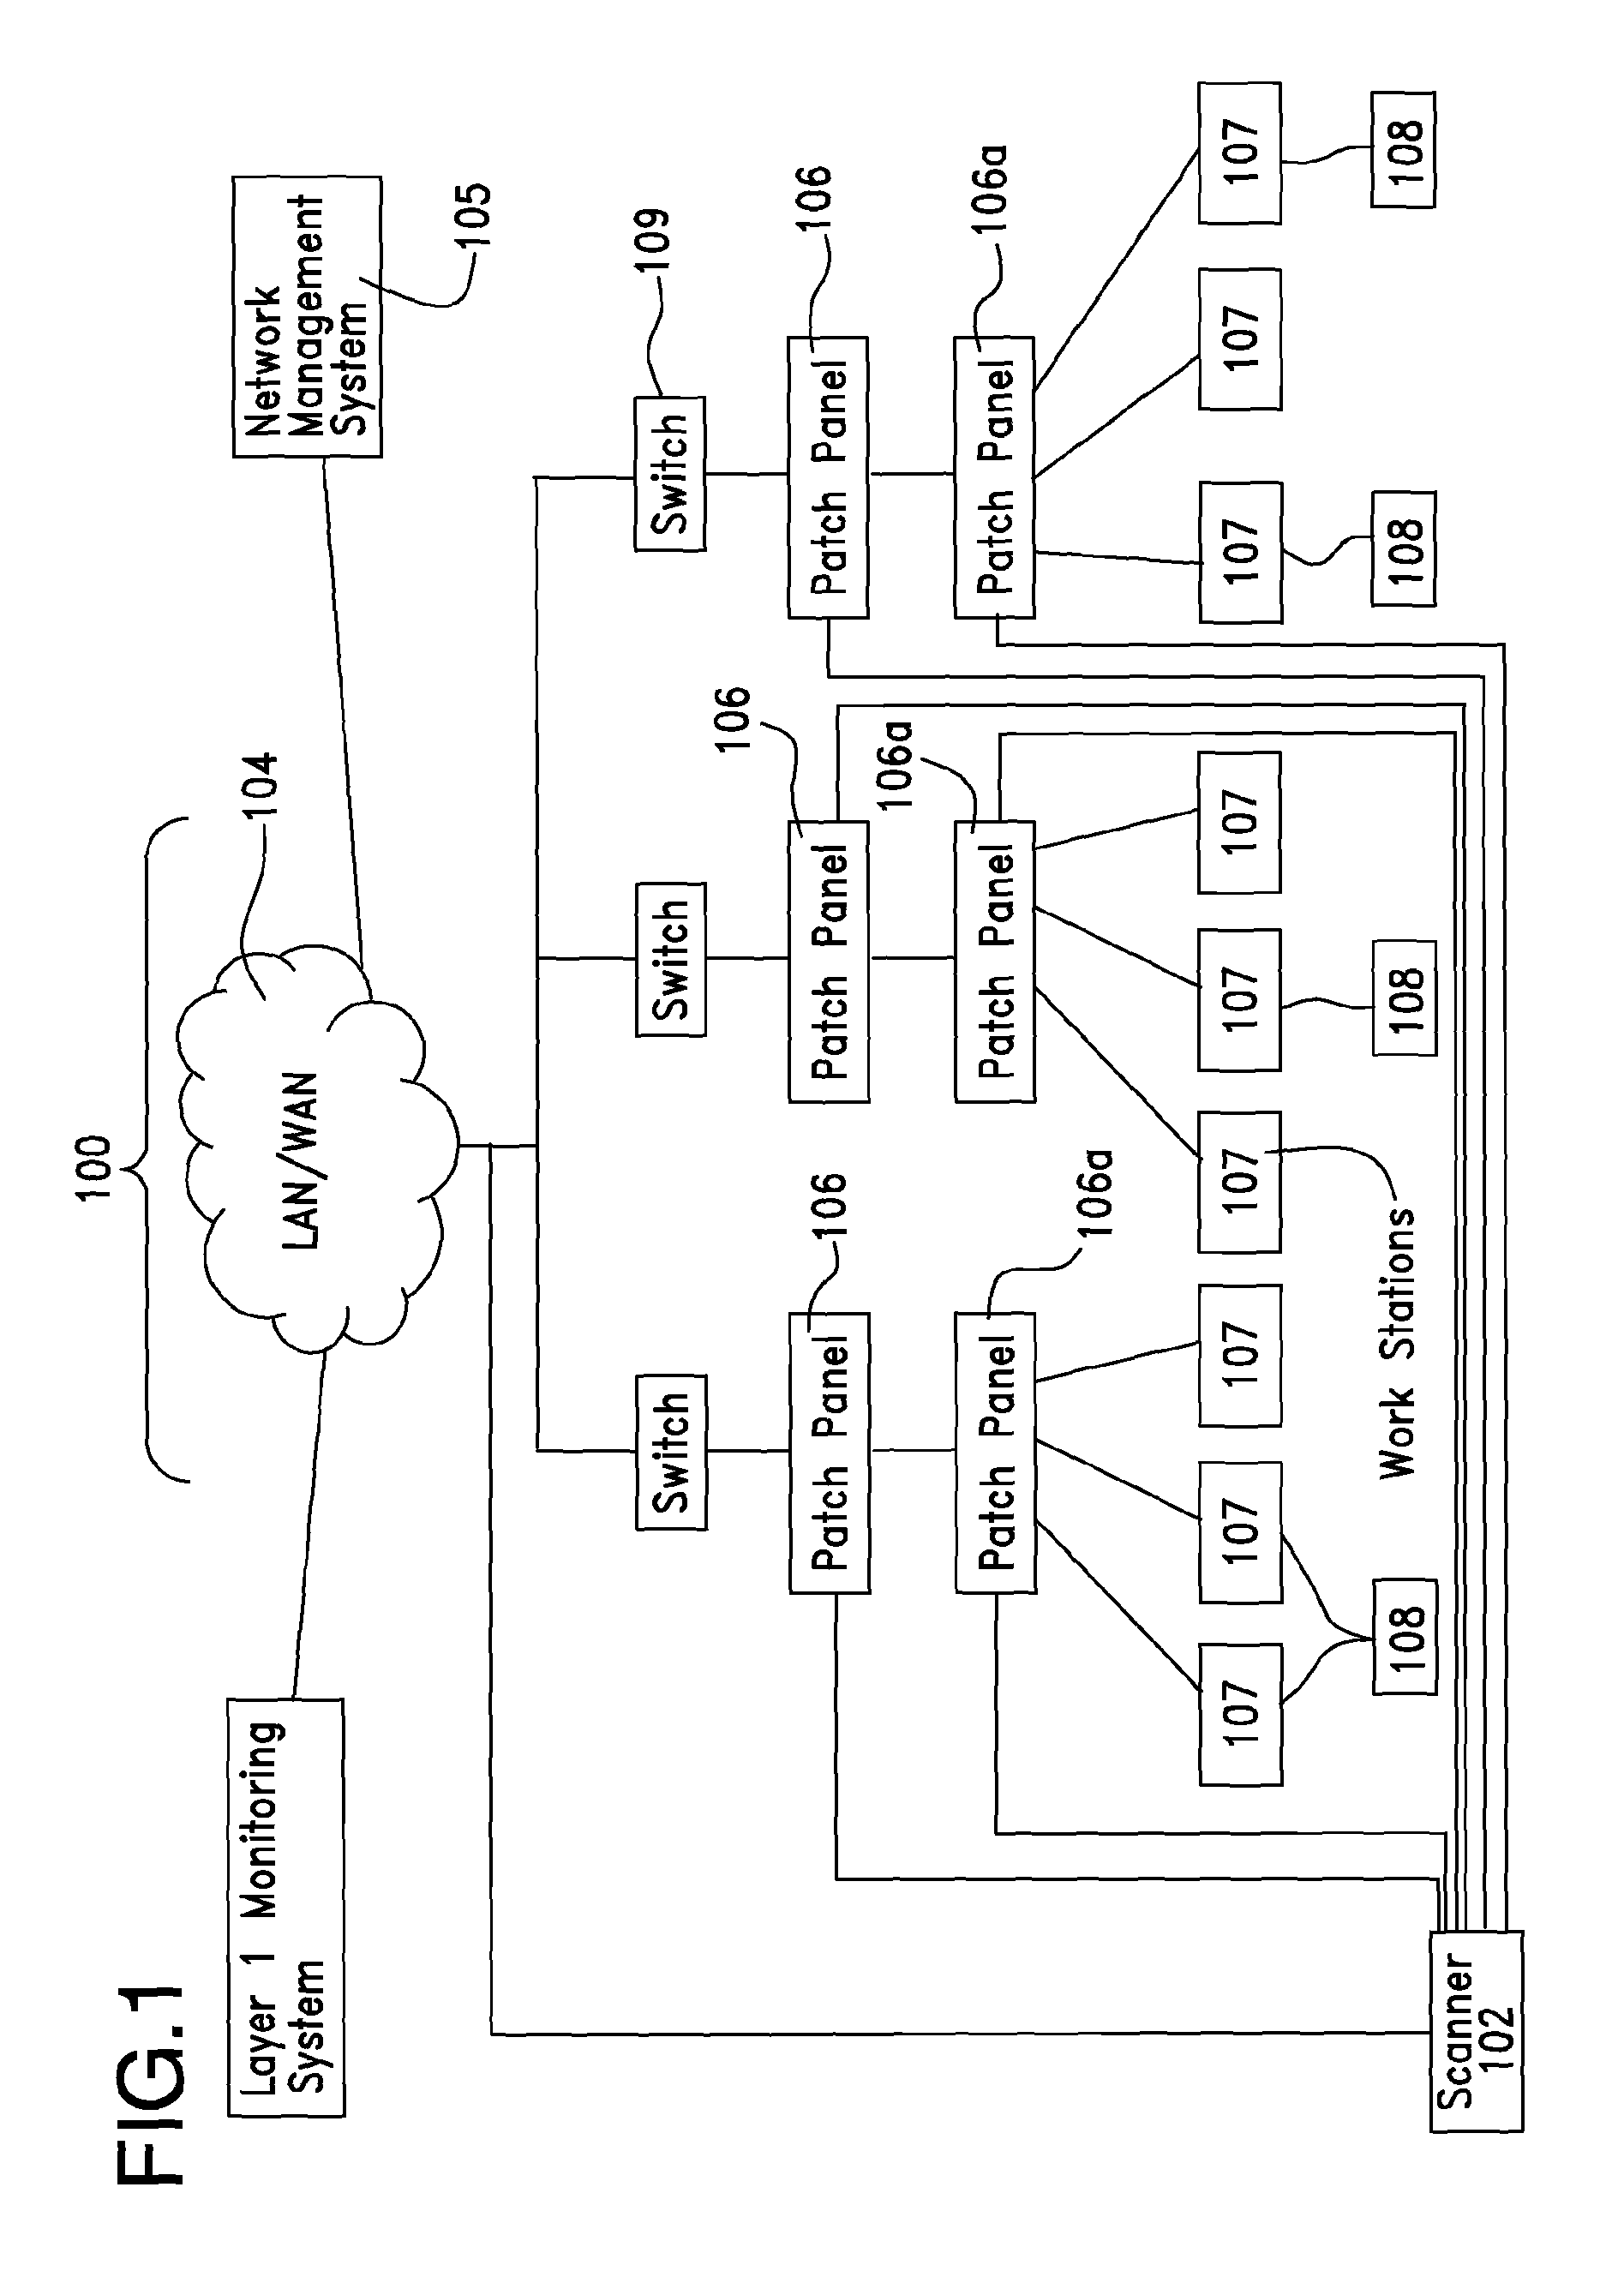 Termination cap for use in wired network management system